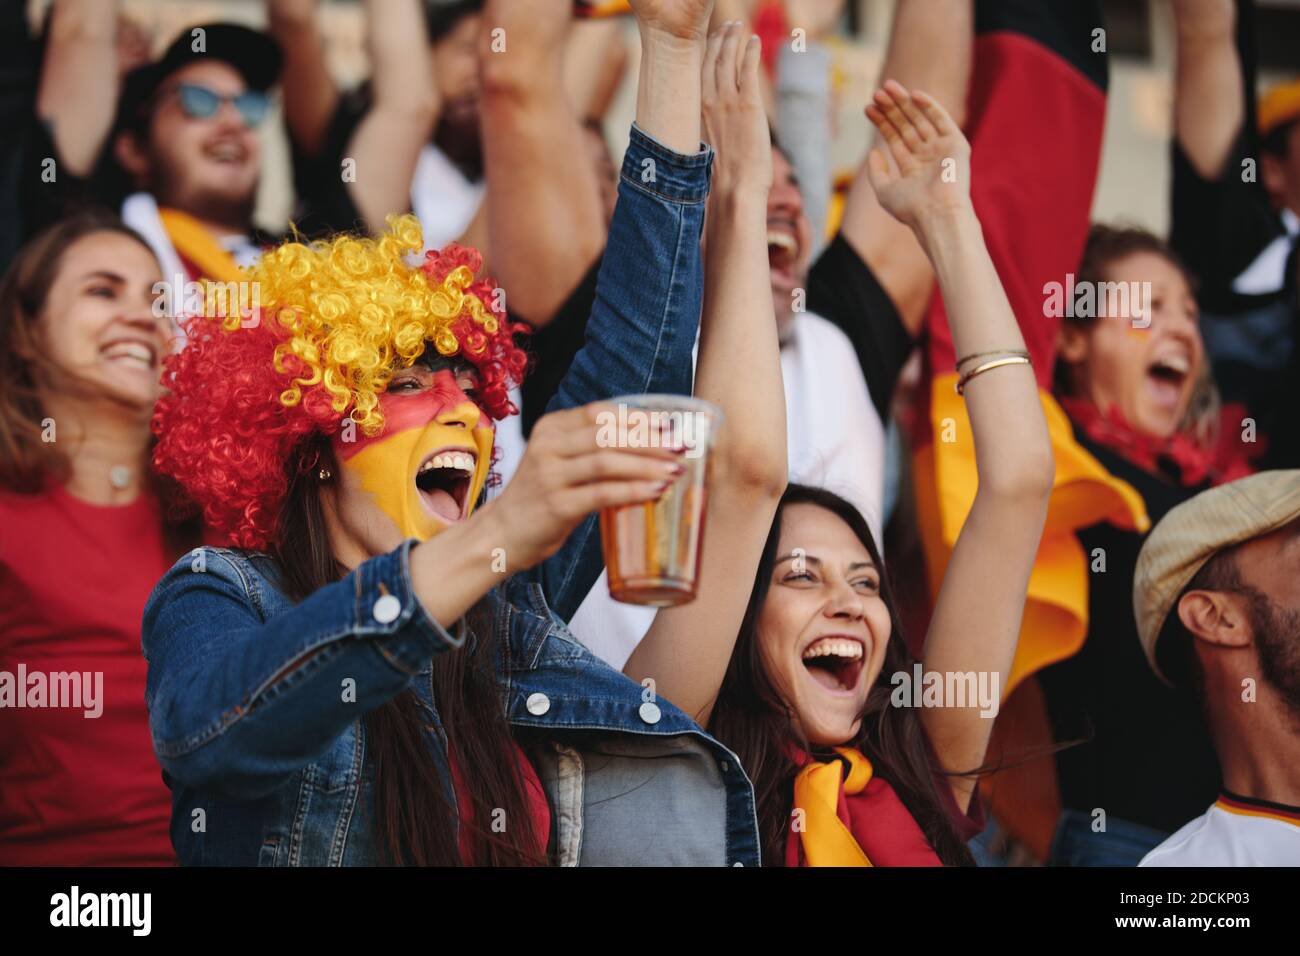 Woman in fan zone with a wig and face painted in german flag colors holding a glass of beer and cheering with crowd of spectators at sports event. Ger Stock Photo